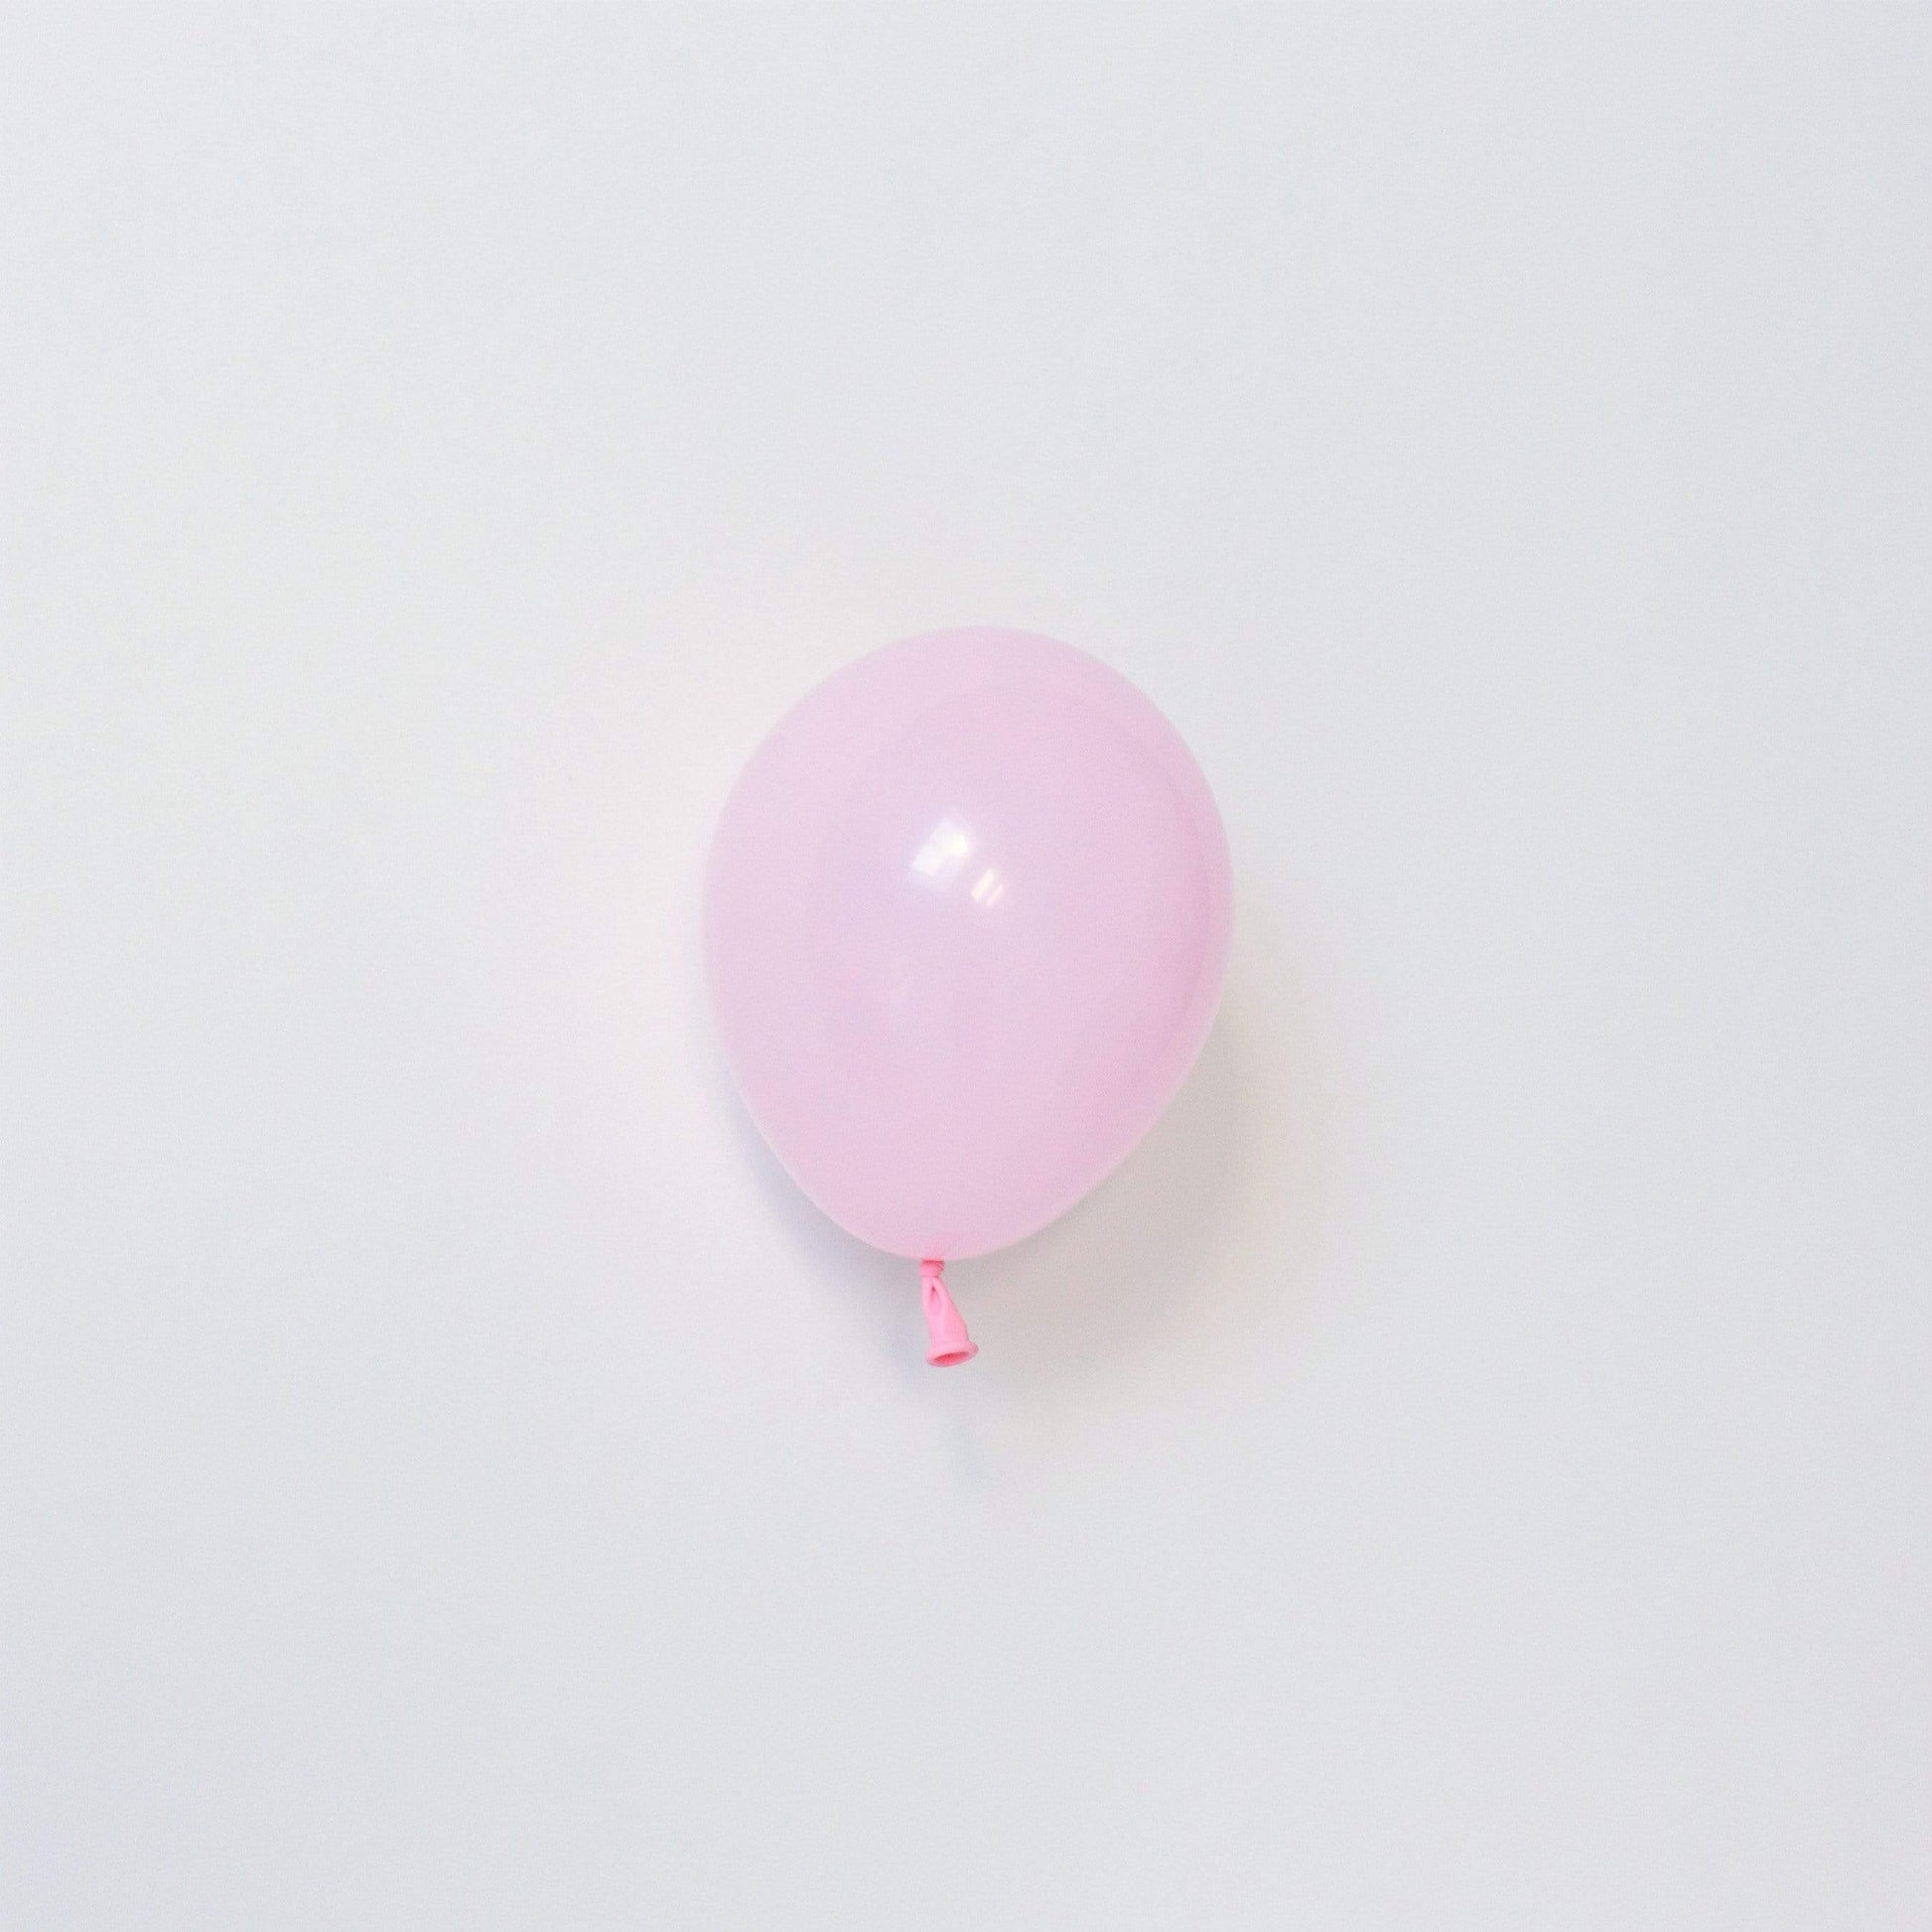 5" inch Balloons in Pink - Pretty Little Party Shop Qualatex